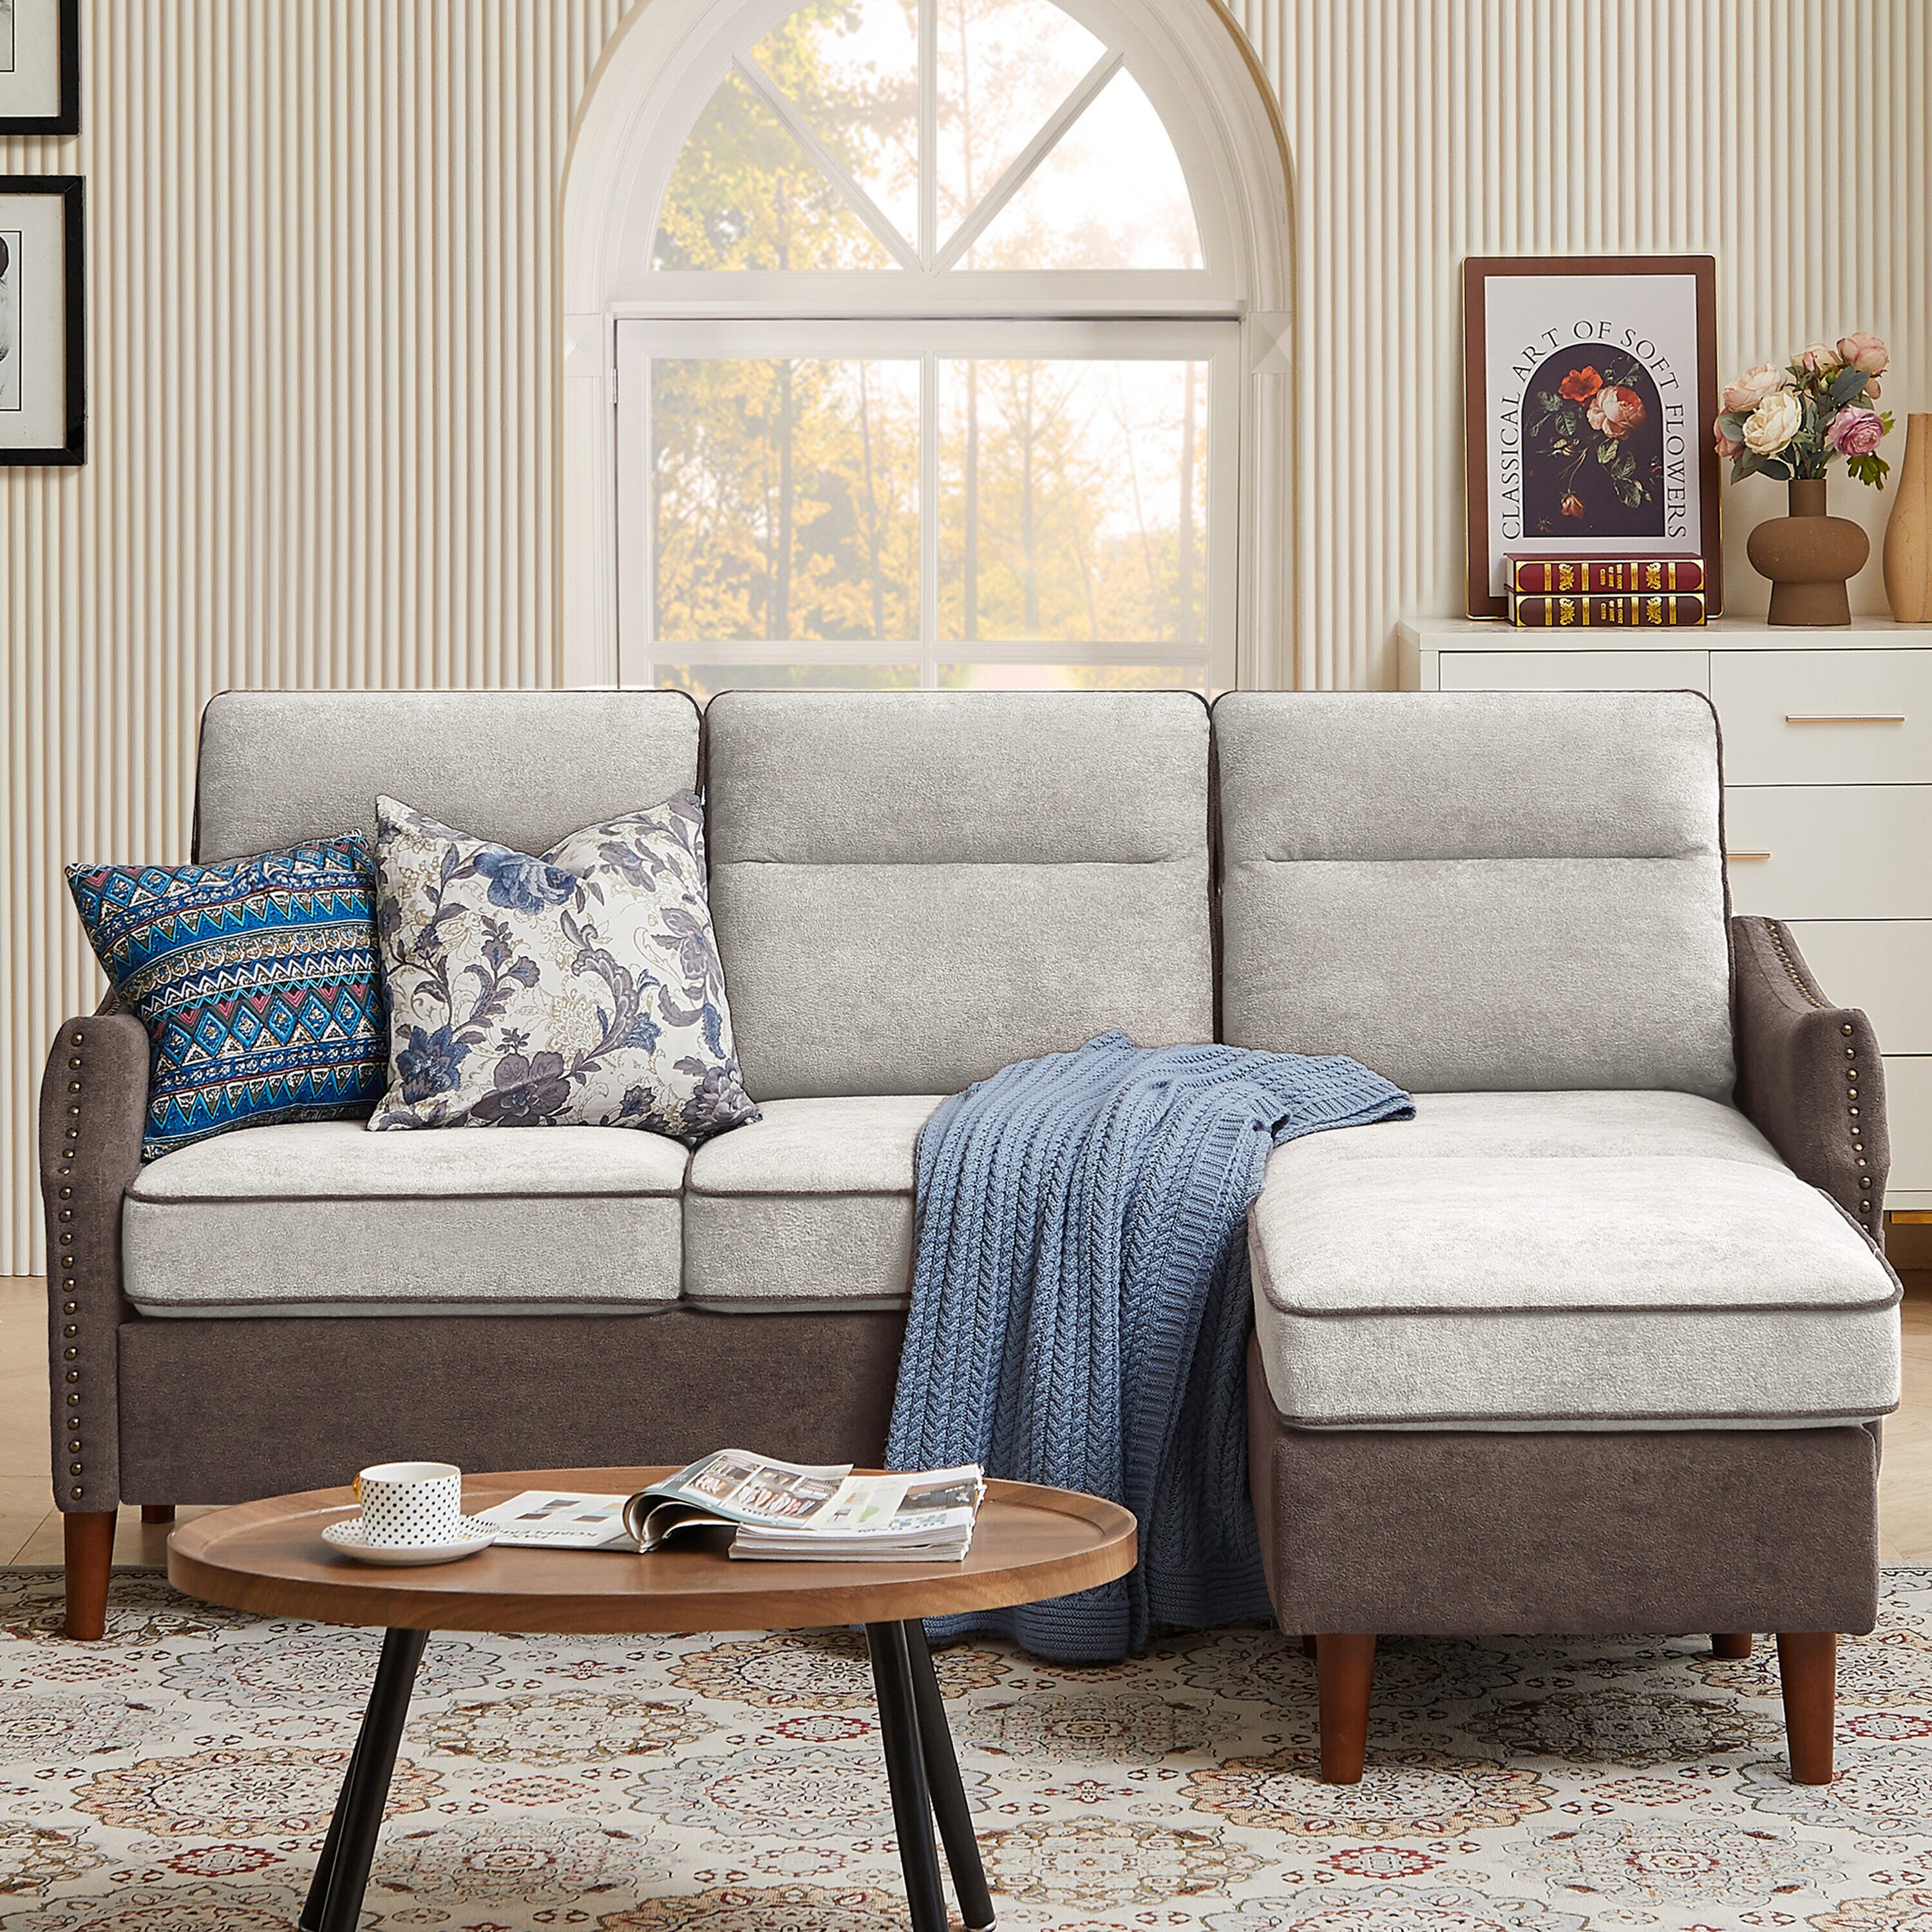 Beige 3 seater sectional couch with green and gray accent pillows